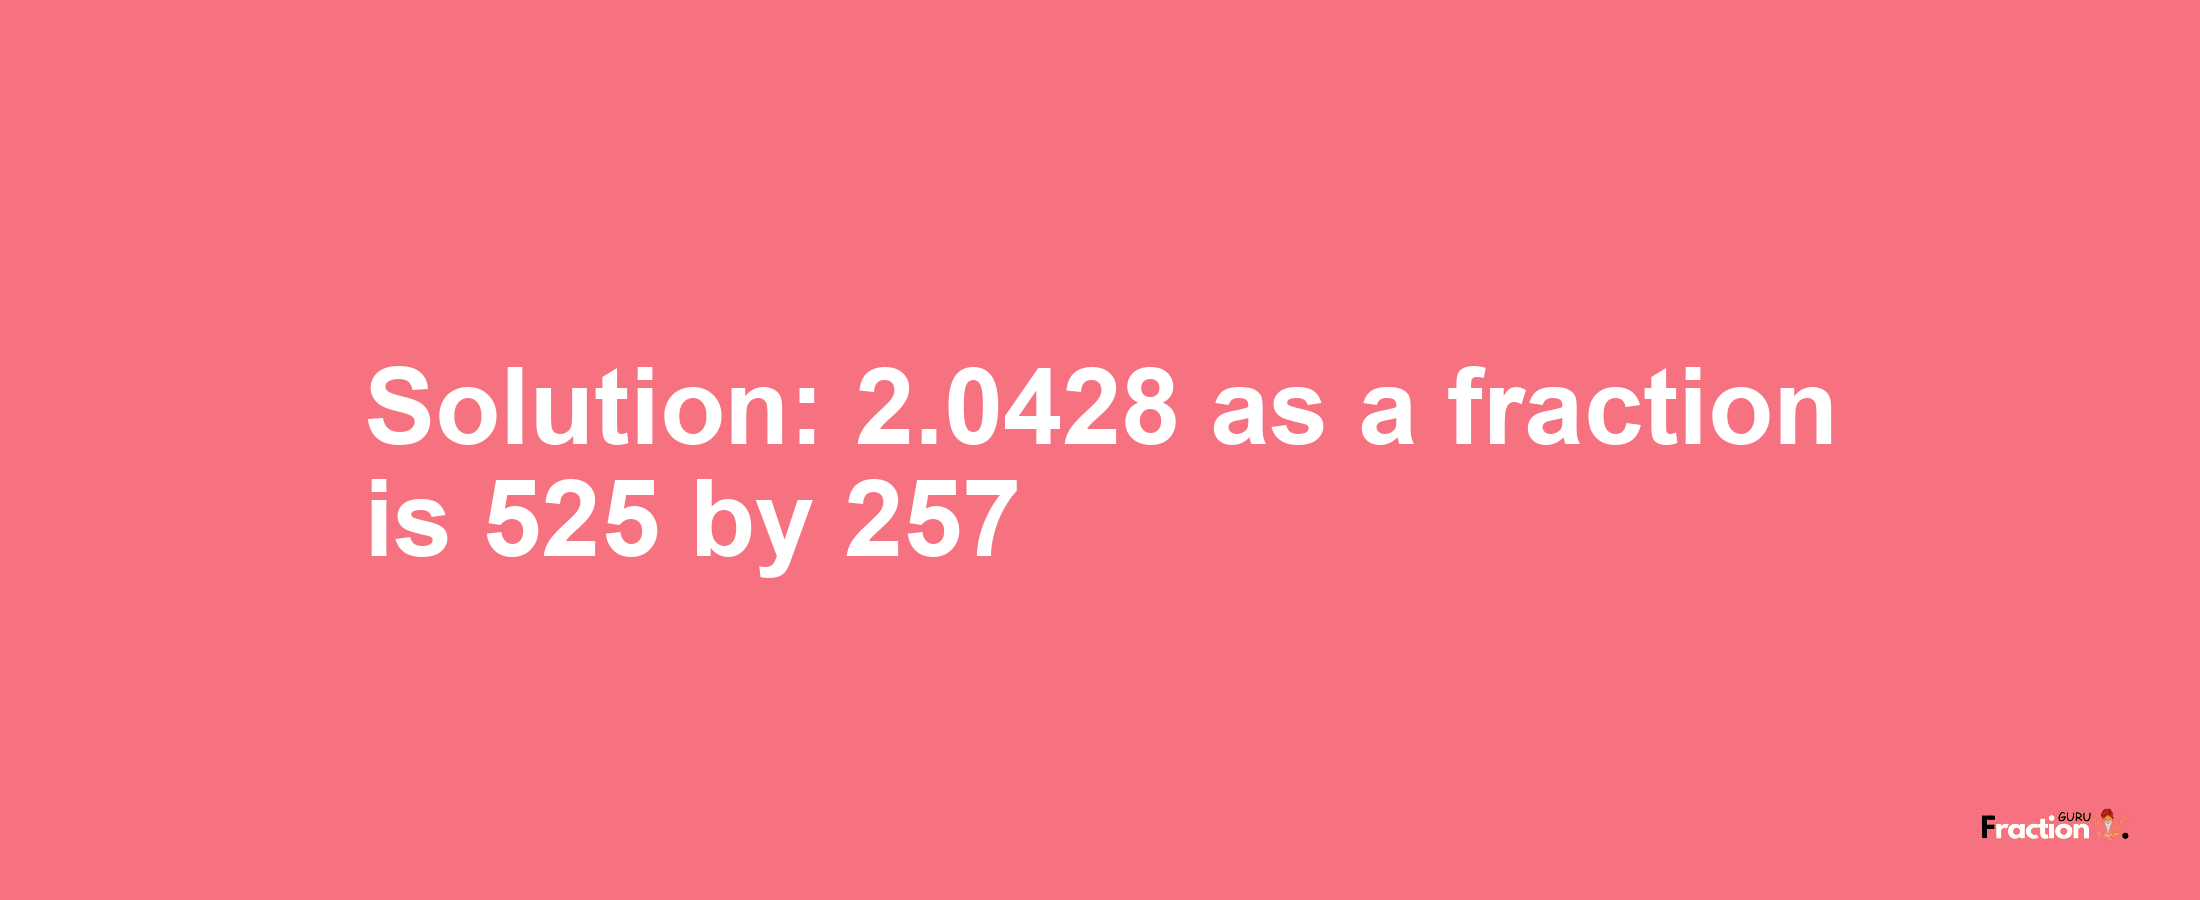 Solution:2.0428 as a fraction is 525/257